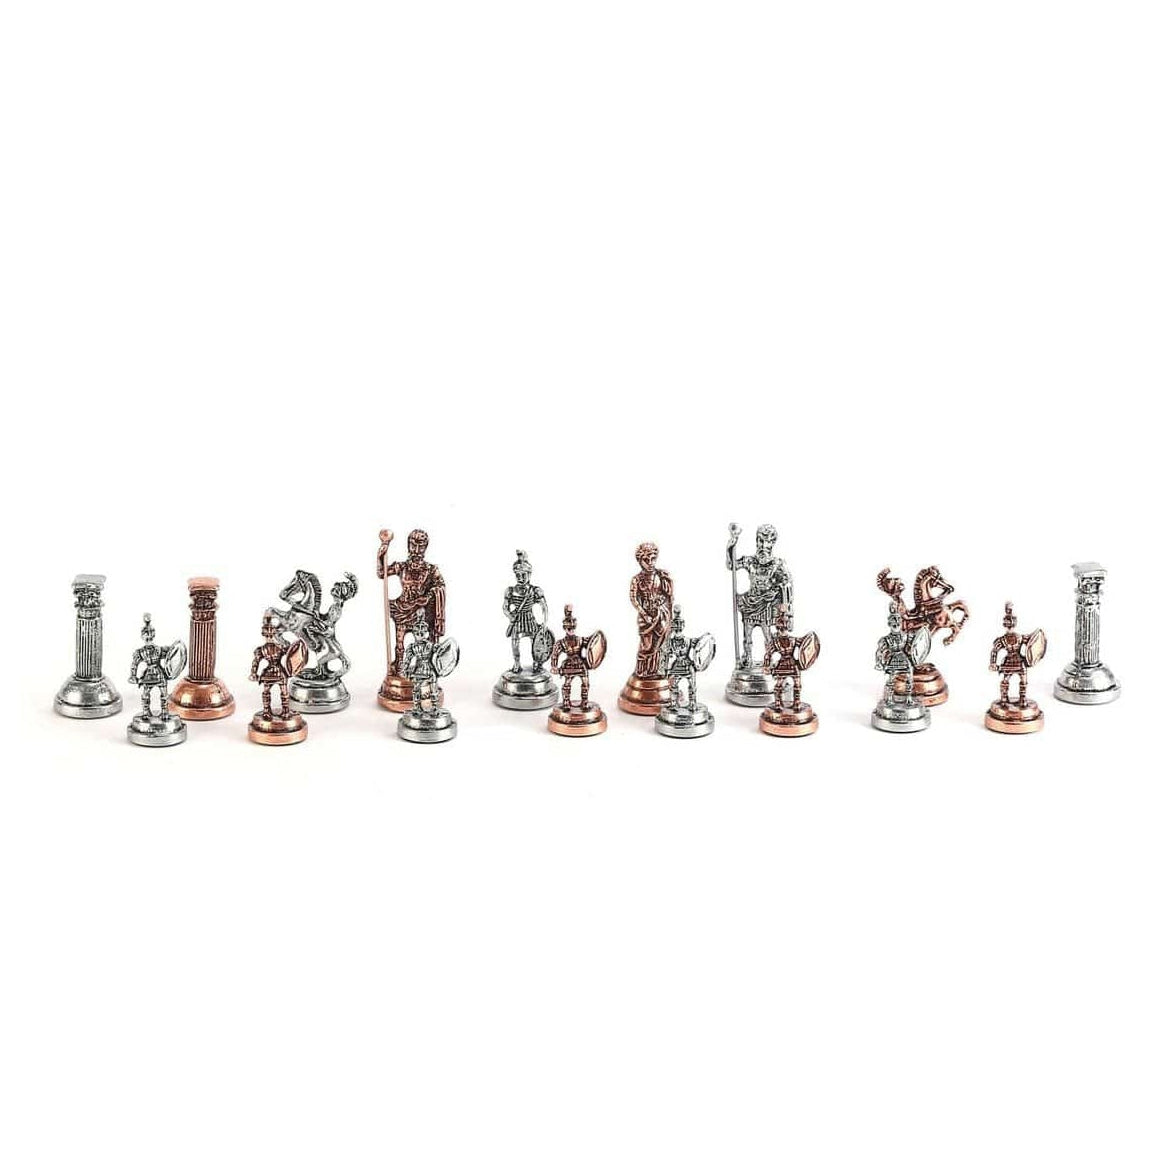 Copper Roman Figures With Compact Stylish Chess Board | whatagift.com.au.